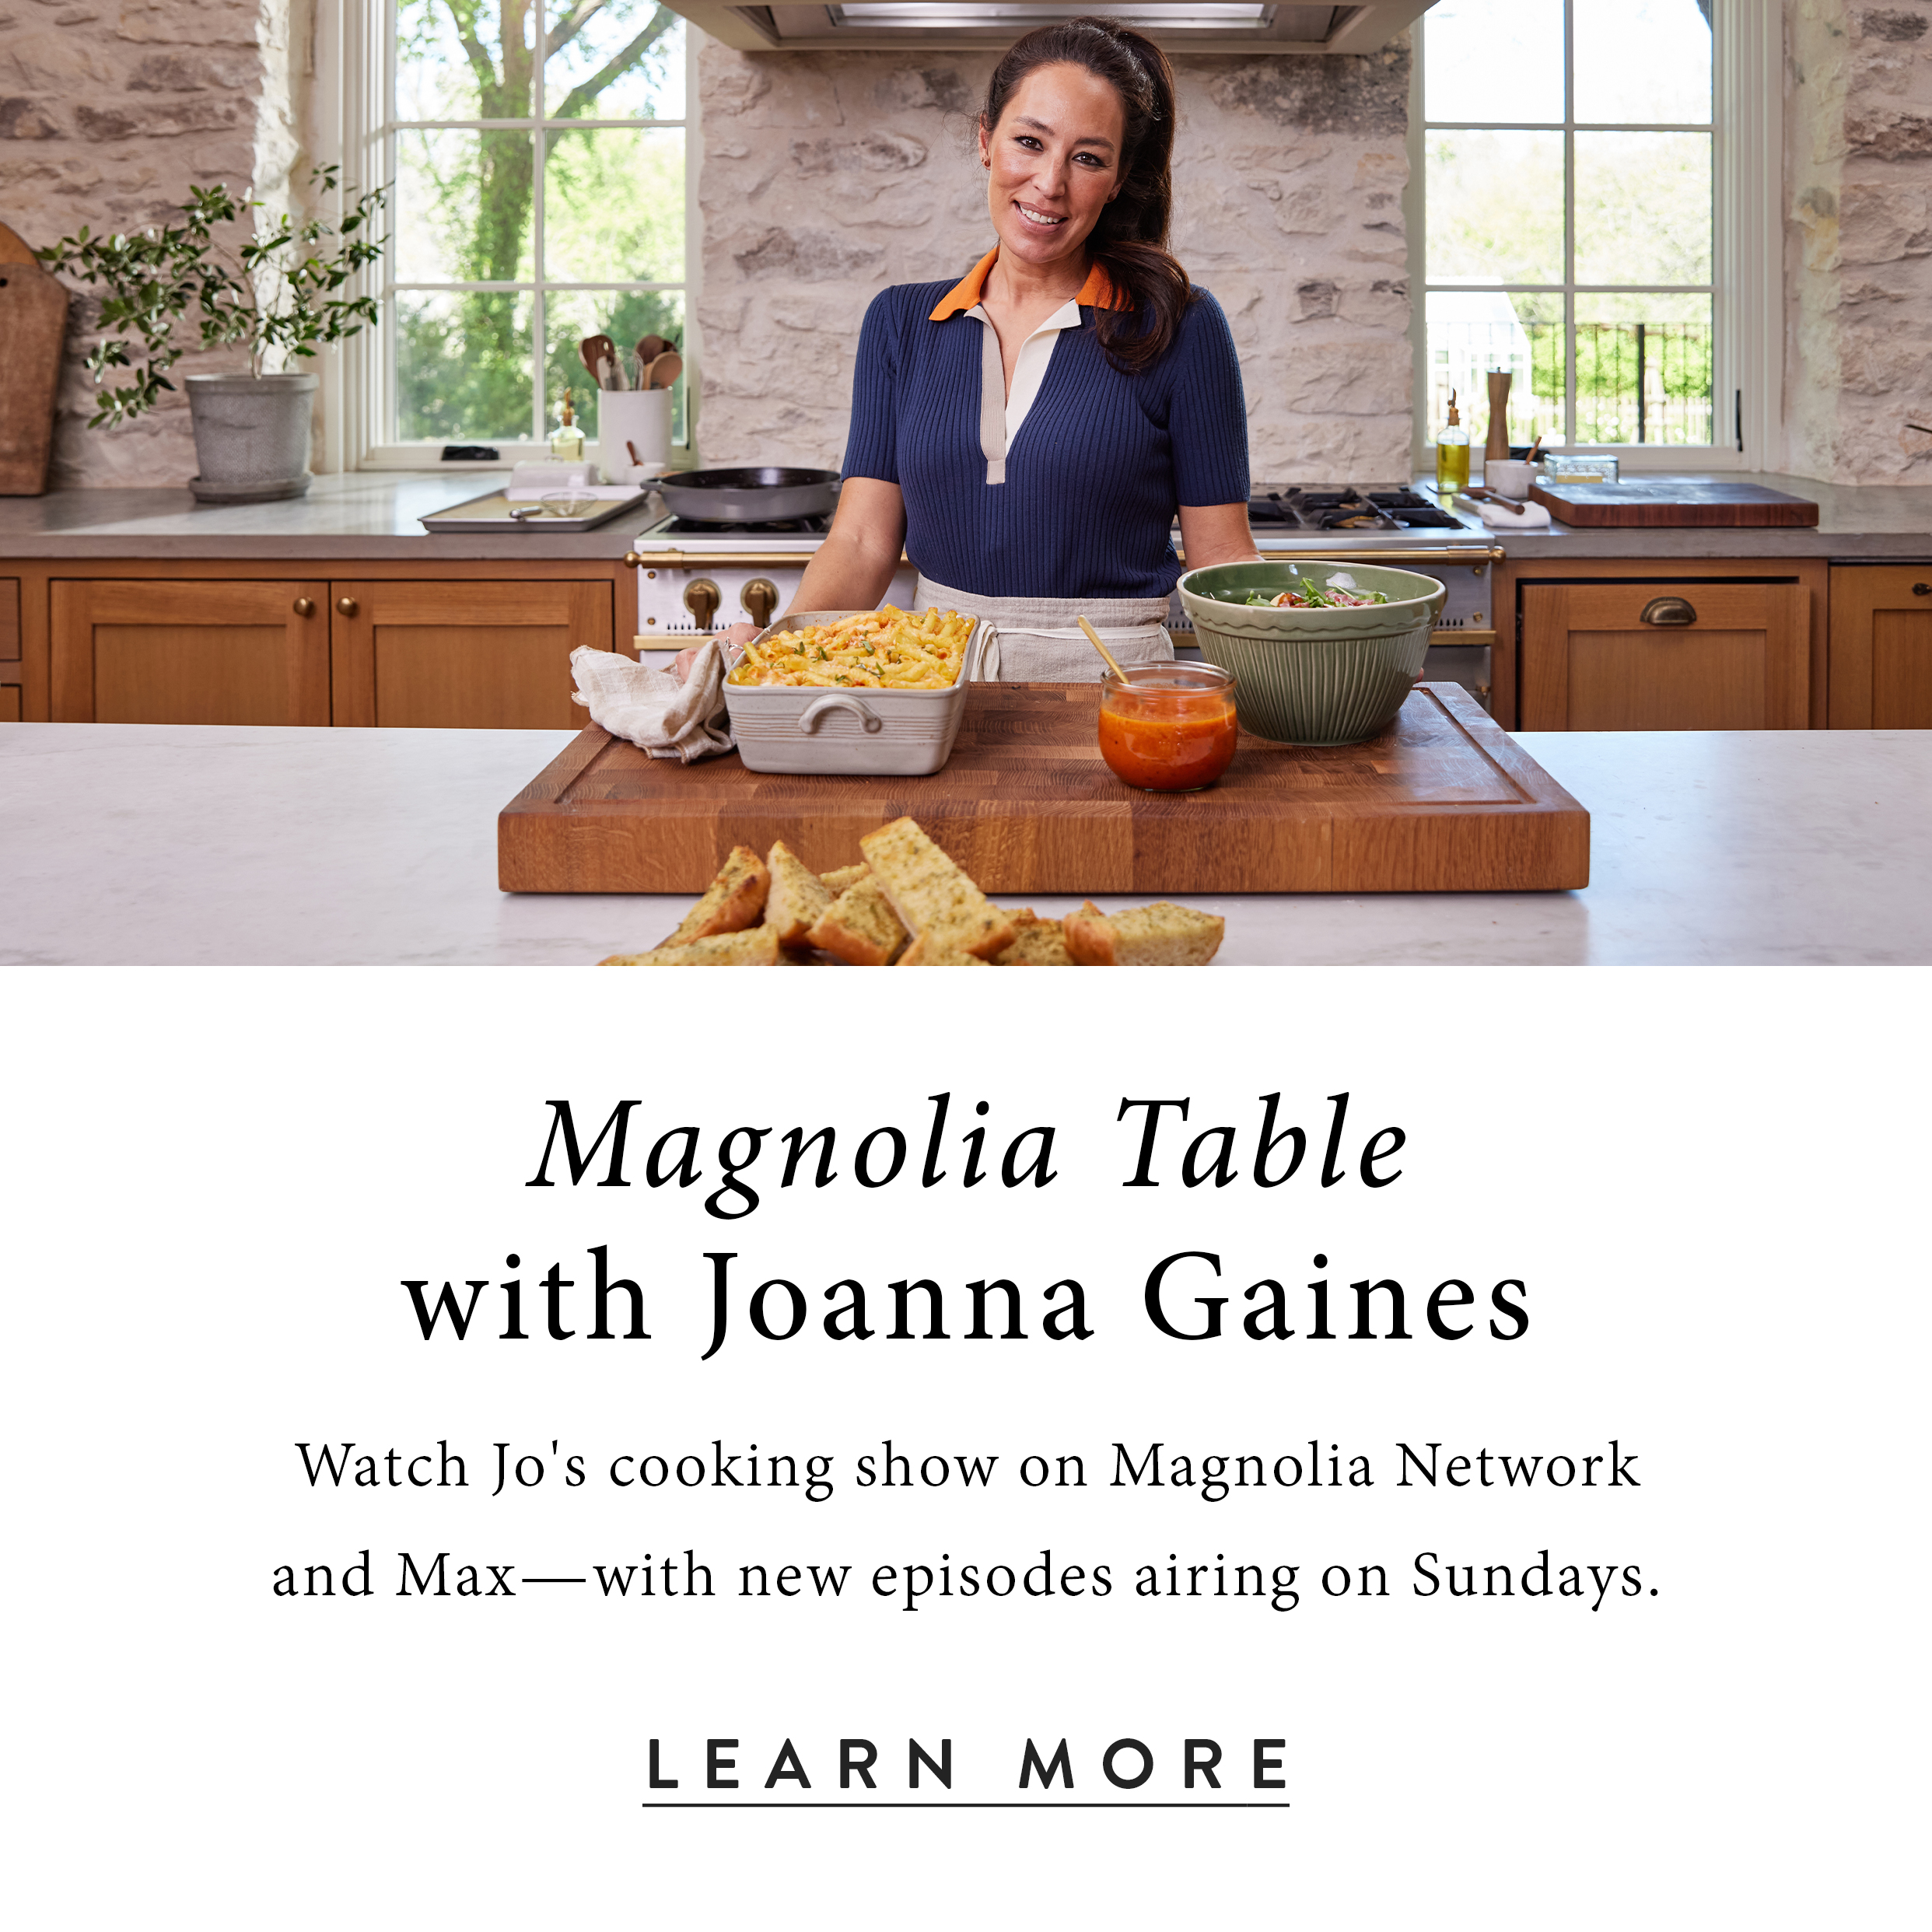 Watch Magnolia Table Season 8 new episodes air on Sunday